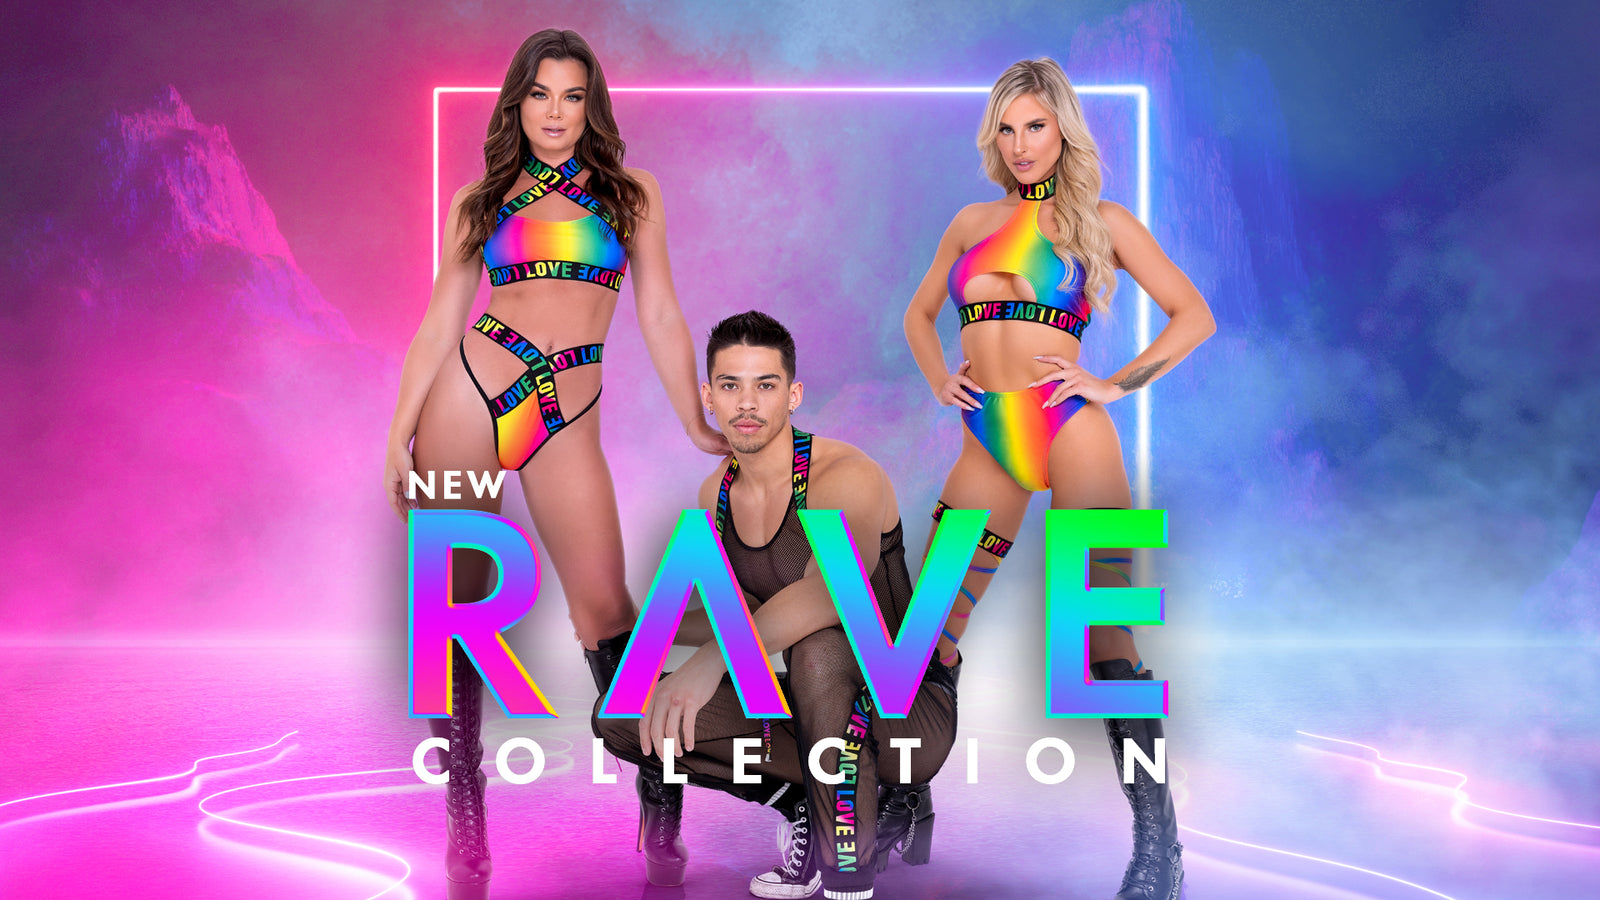 MEN'S RAVE CLOHING EDC OUTFITS EDM CLOTHING Tease This End, 60% OFF